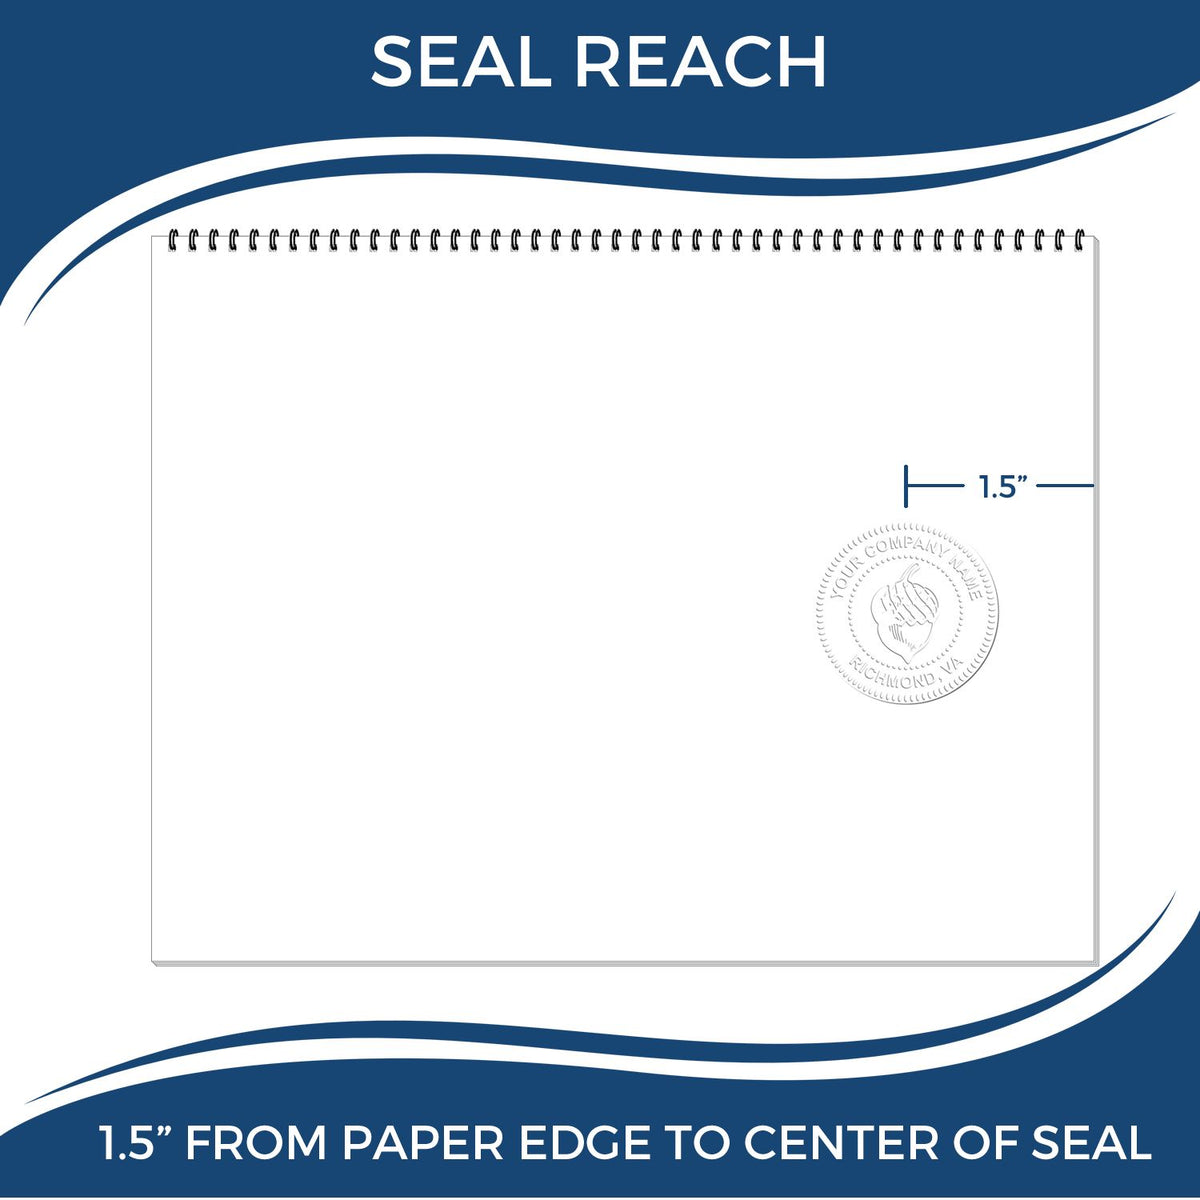 An infographic showing the seal reach which is represented by a ruler and a miniature seal image of the Hybrid Vermont Land Surveyor Seal